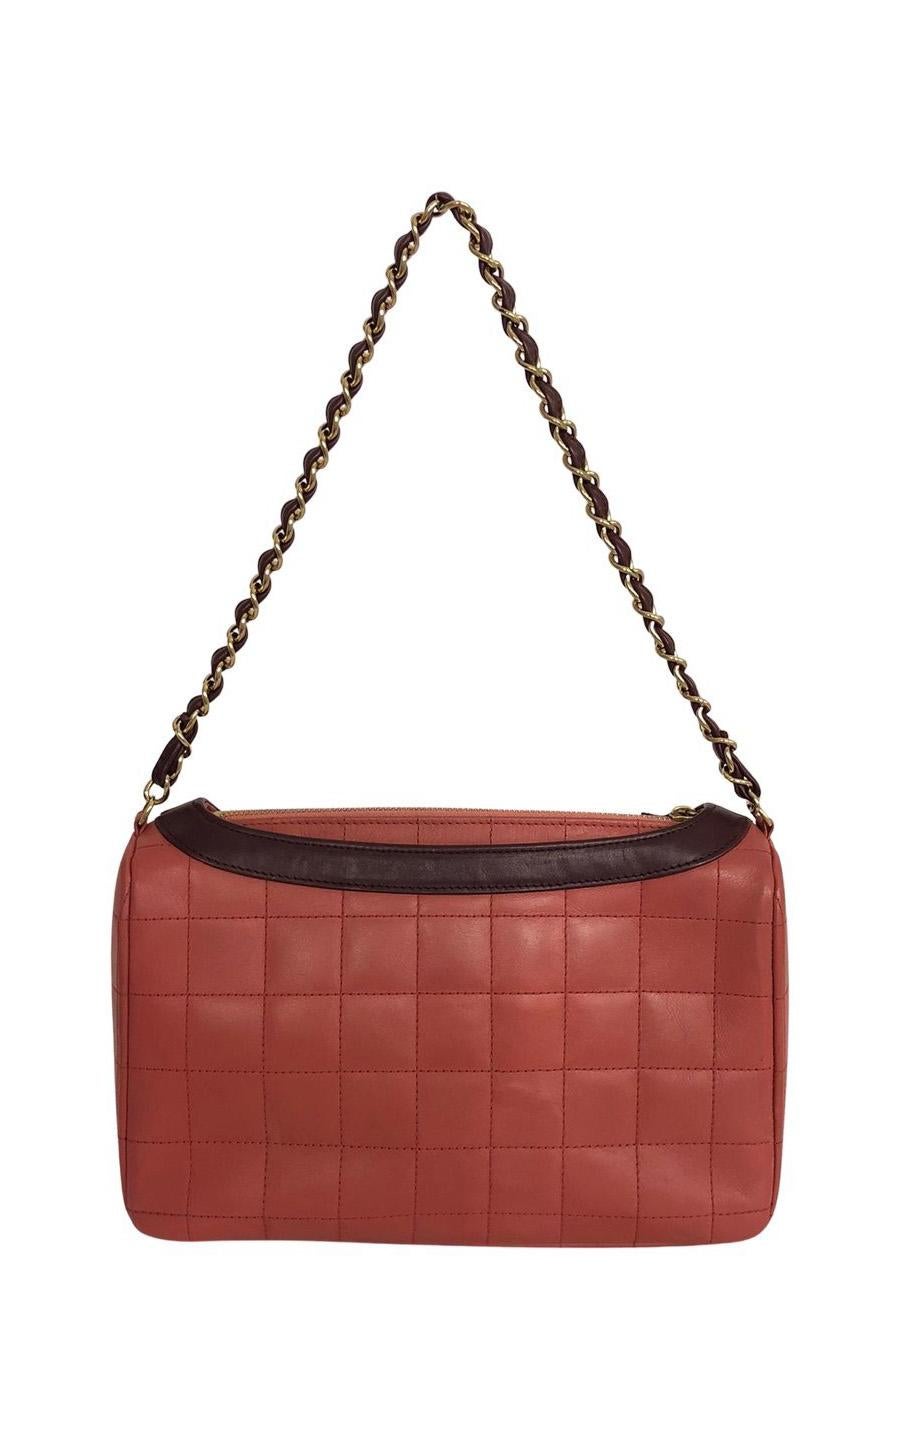 Brown Vintage Chanel shoulder bag in red lambskin leather with purple leather details